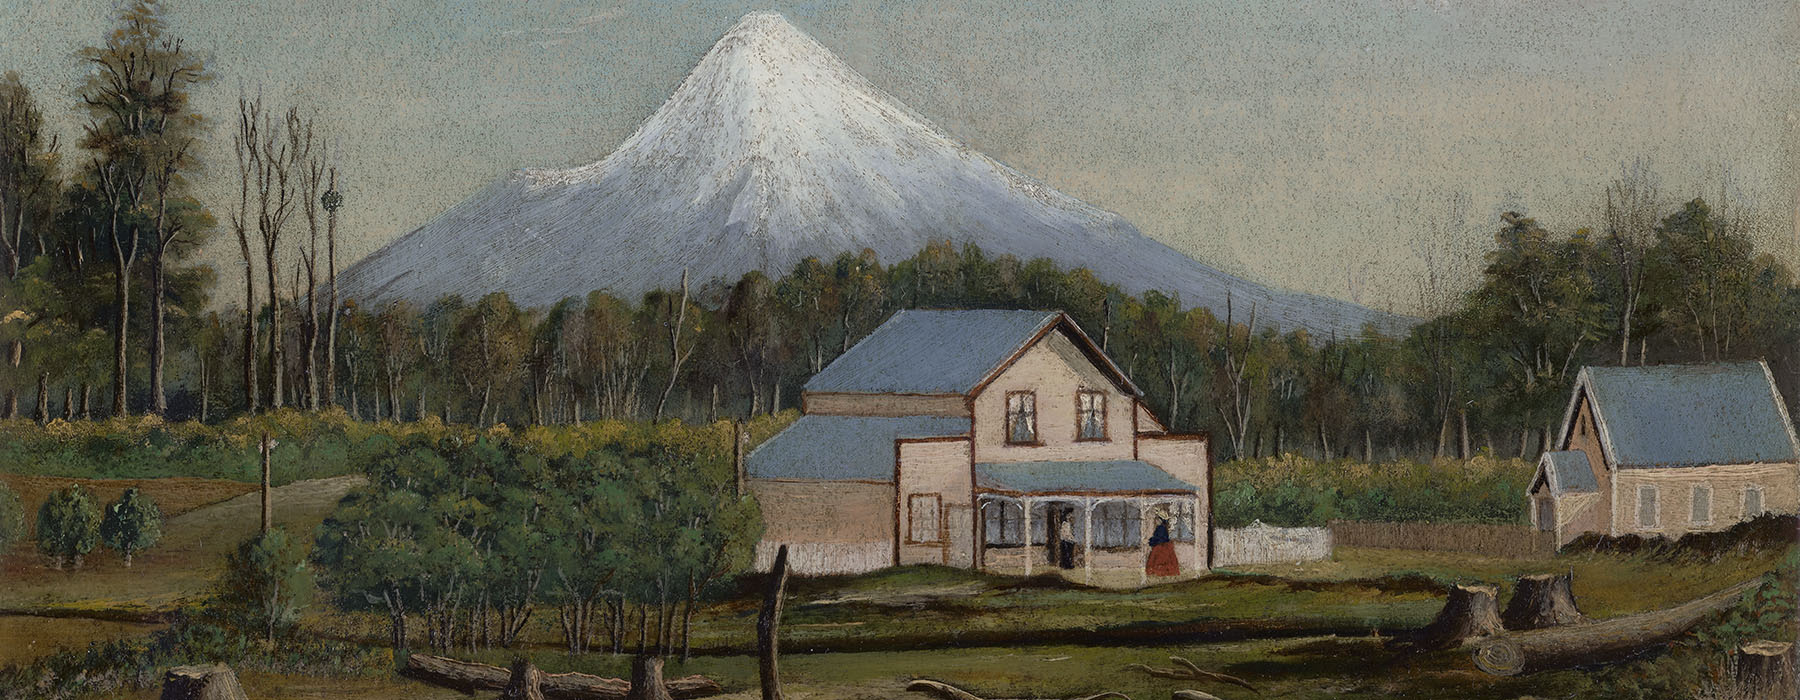 Painting of cleared land with a small house and church; behind, Mt Taranaki looms large over the land